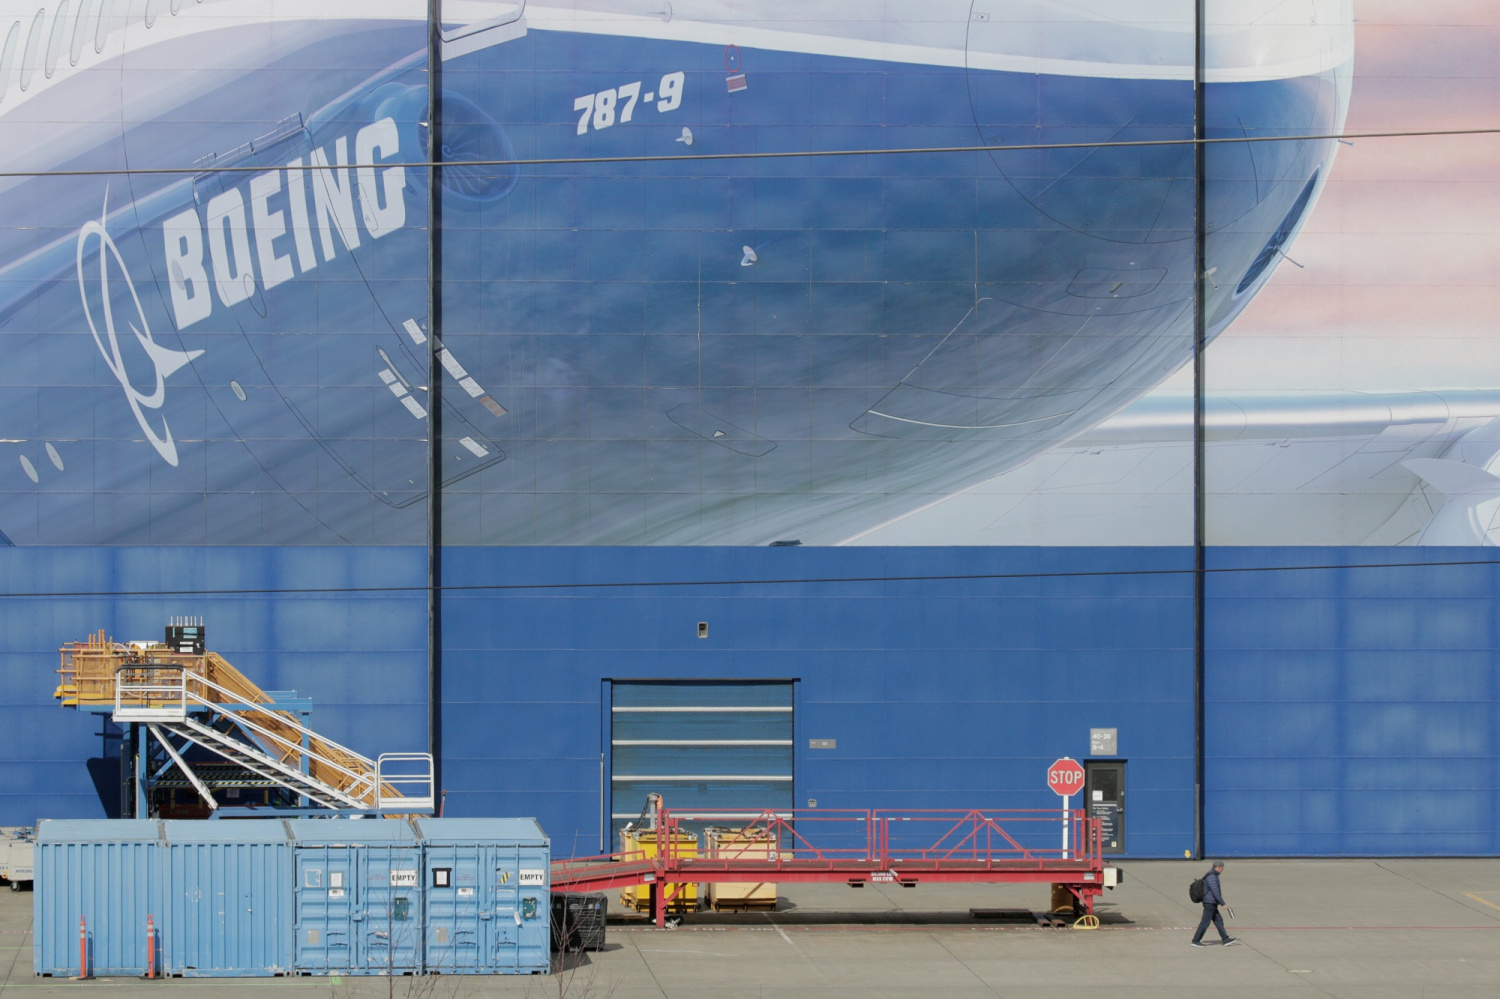 Boeing Announces Massive Layoff Affecting 16,000 Employees